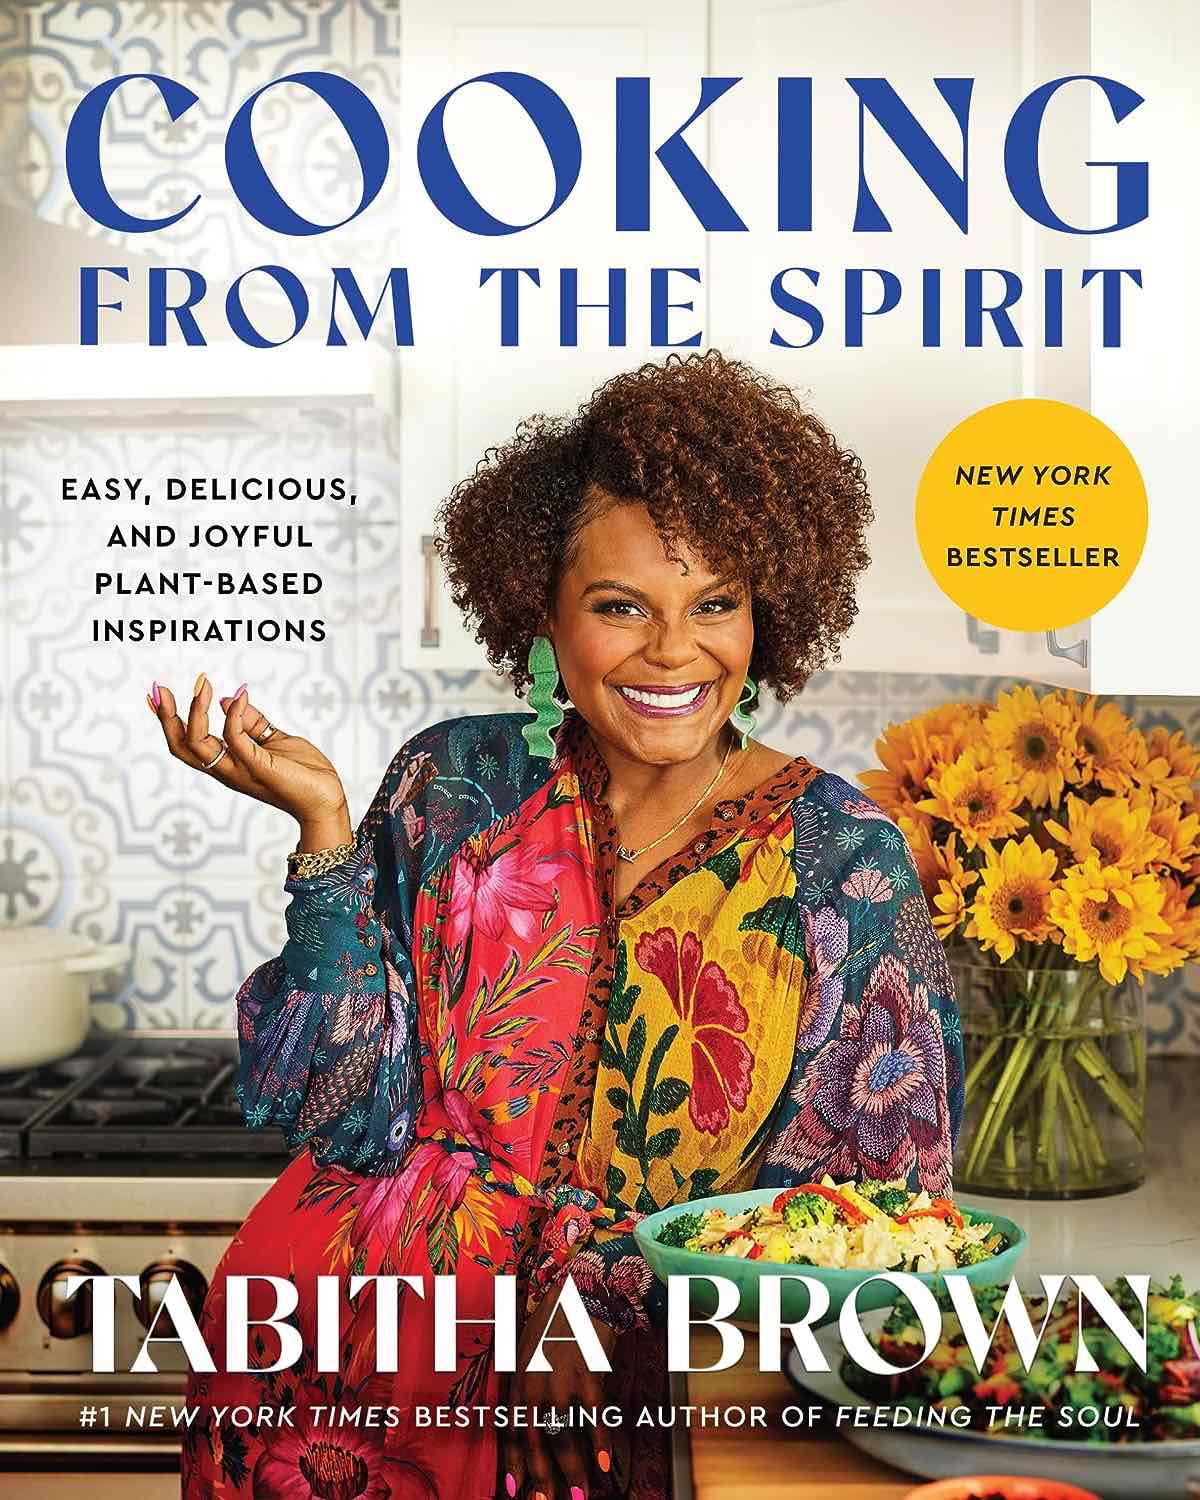 The cover of Tabitha Brown's vegan cookbook called "Cooking From the Spirit."